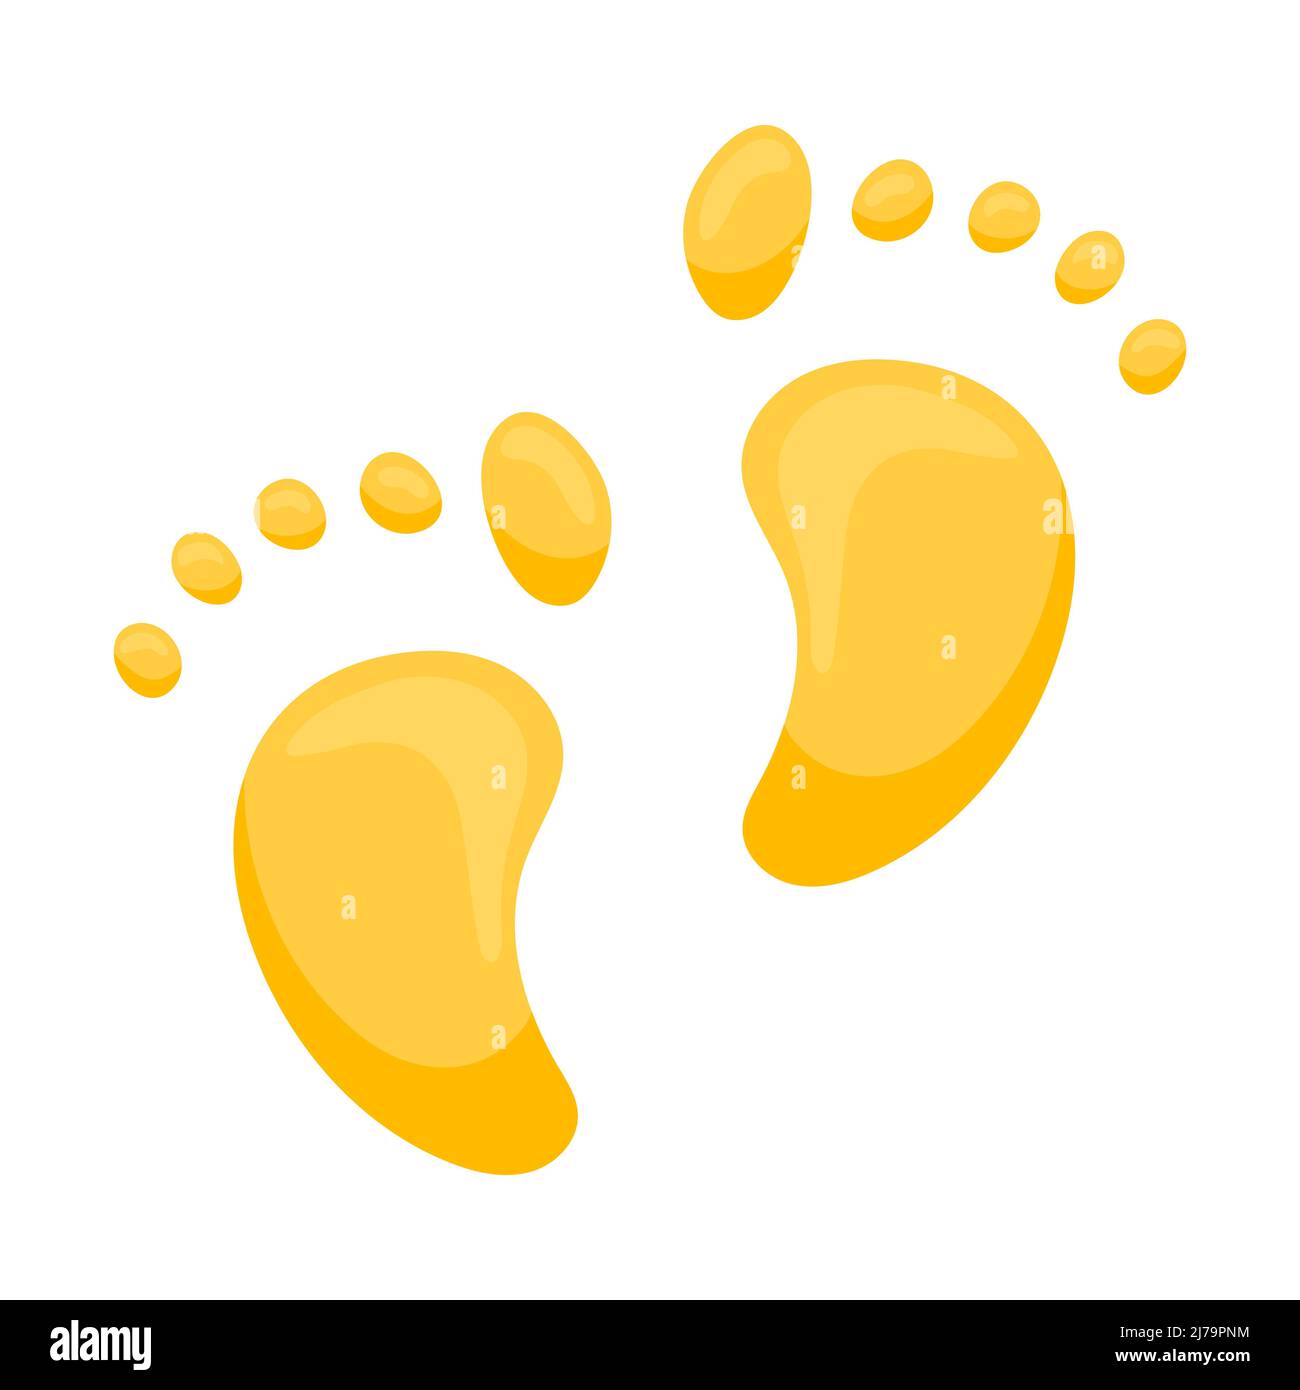 Footprints of human feet with fingers. Abstract footprints. Vector illustration in a flat cartoon style isolated on a white background Stock Vector